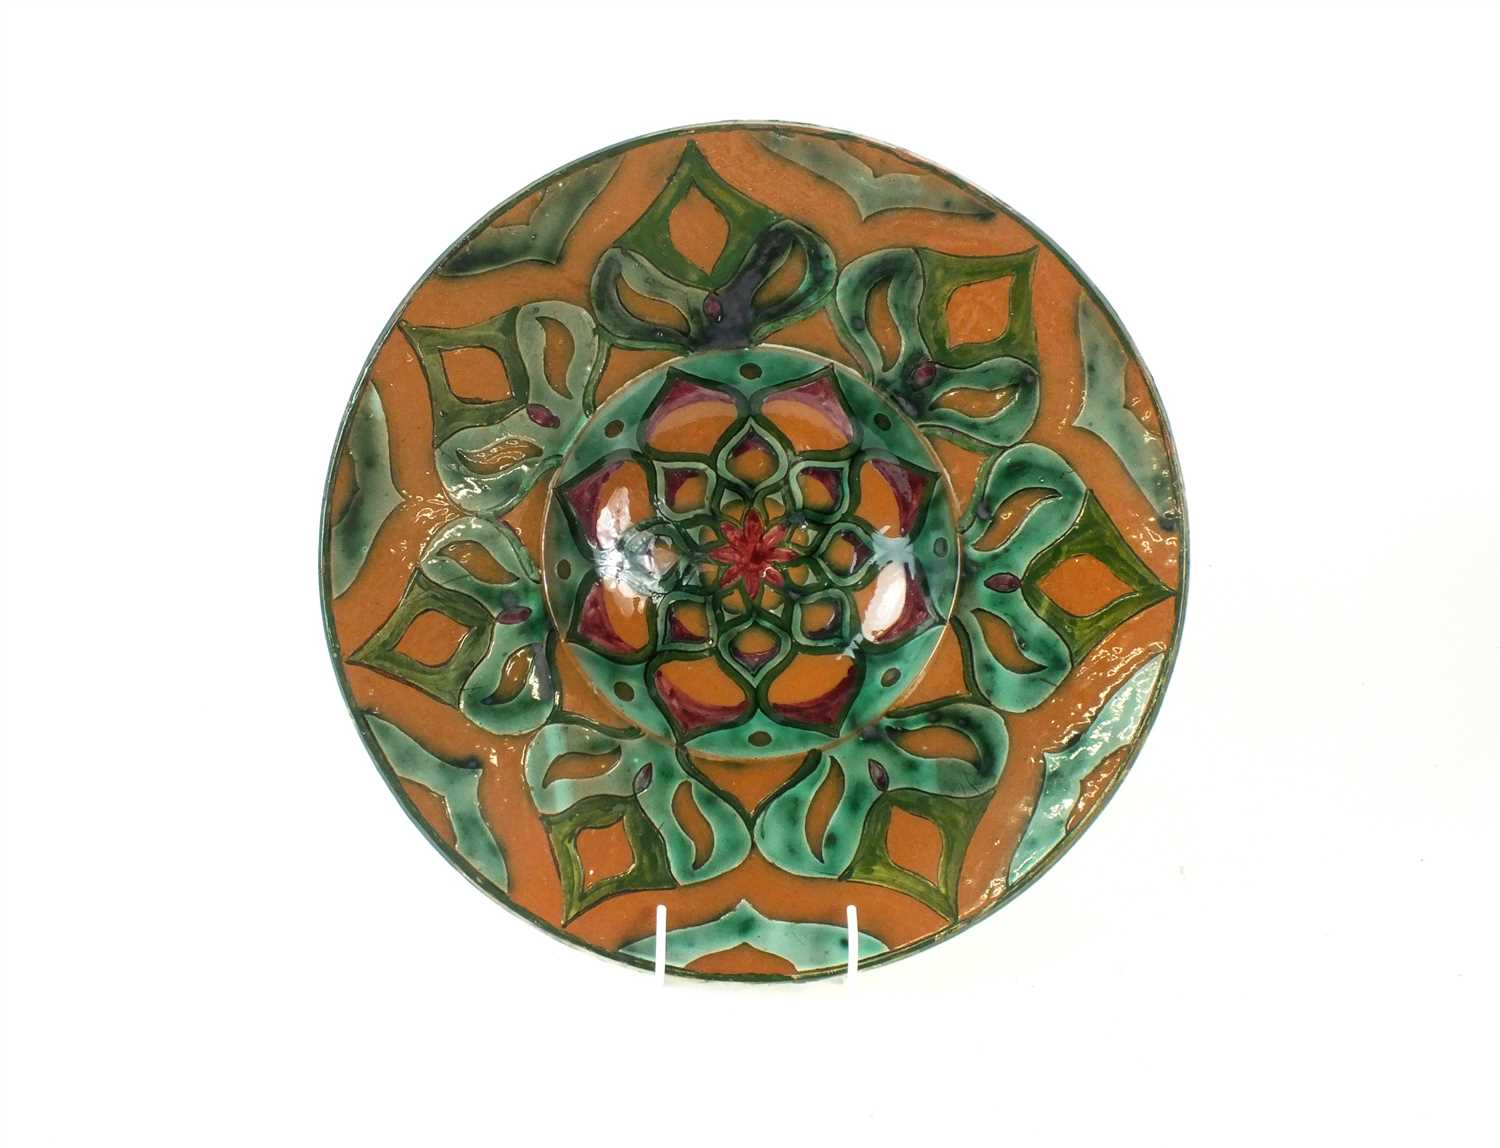 Lot 91 - A Della Robbia Art Pottery charger by Liz Wilkins